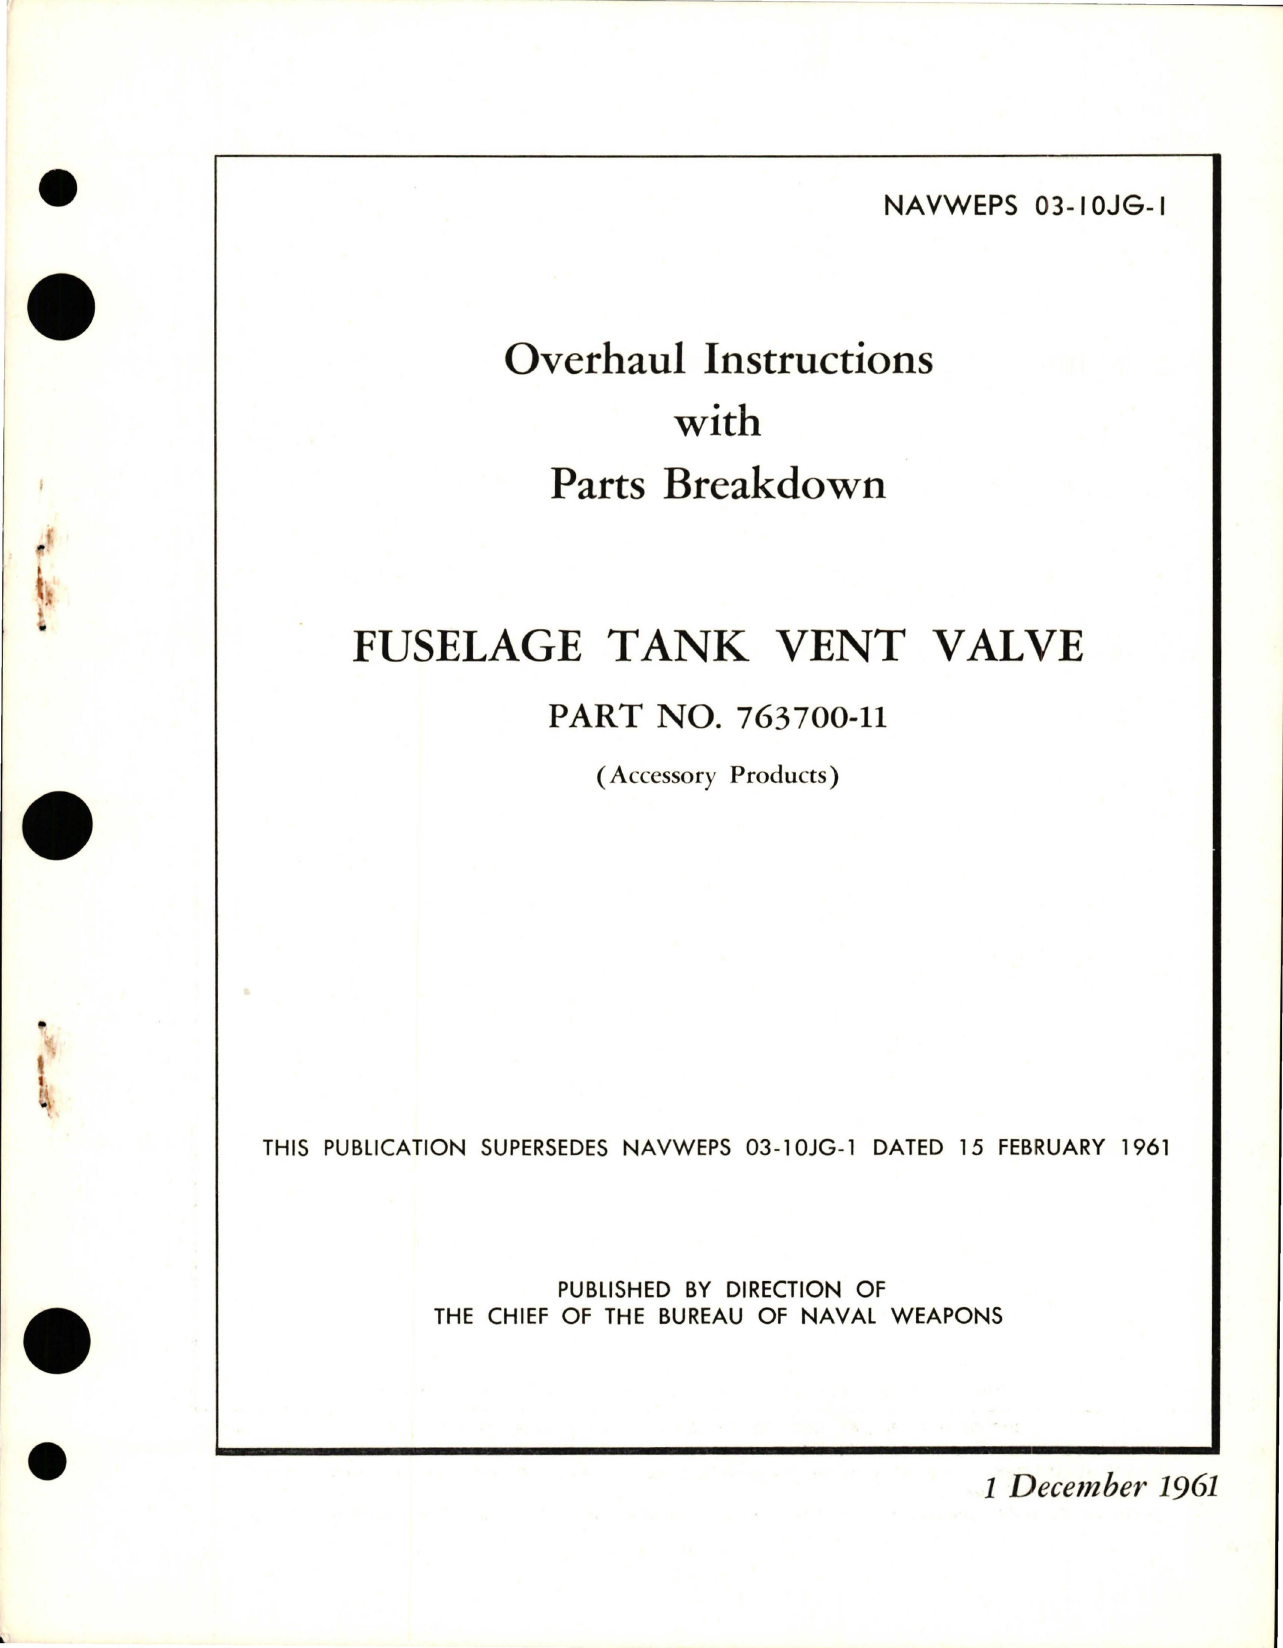 Sample page 1 from AirCorps Library document: Overhaul Instructions with Parts Breakdown Fuselage Tank Vent Valve - Part 763700-11 